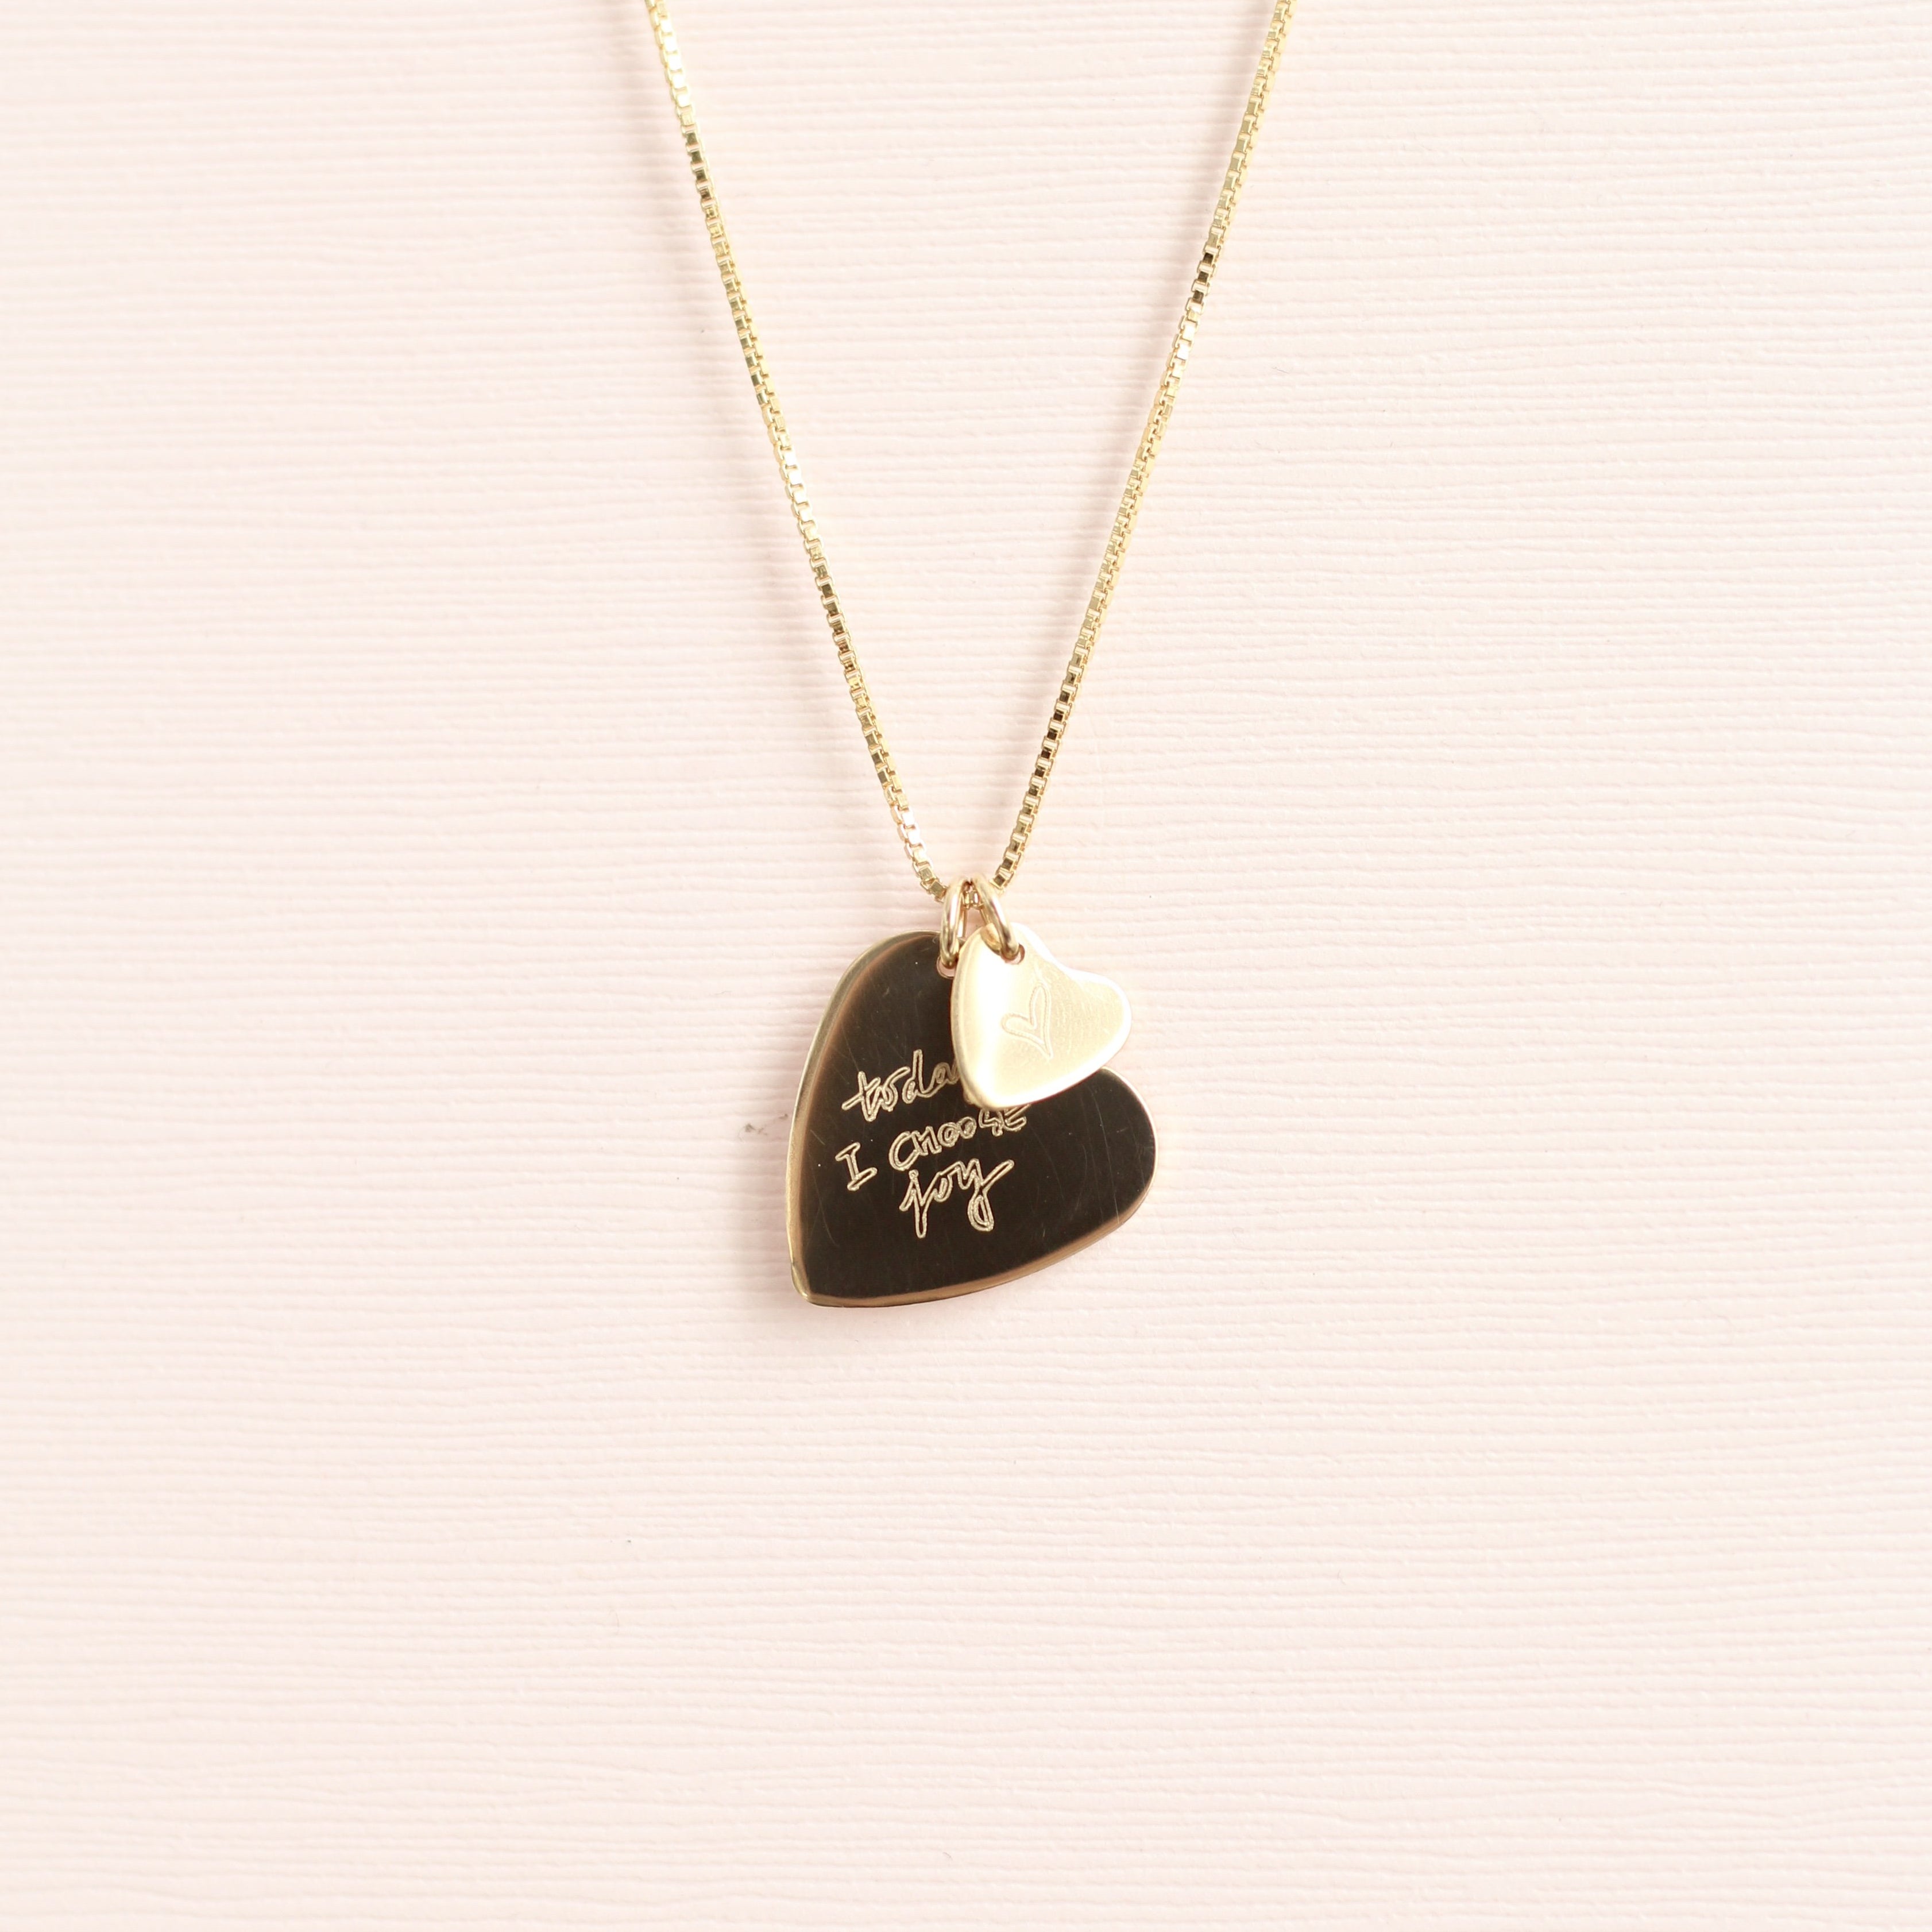 Custom handwriting necklace made in Canada